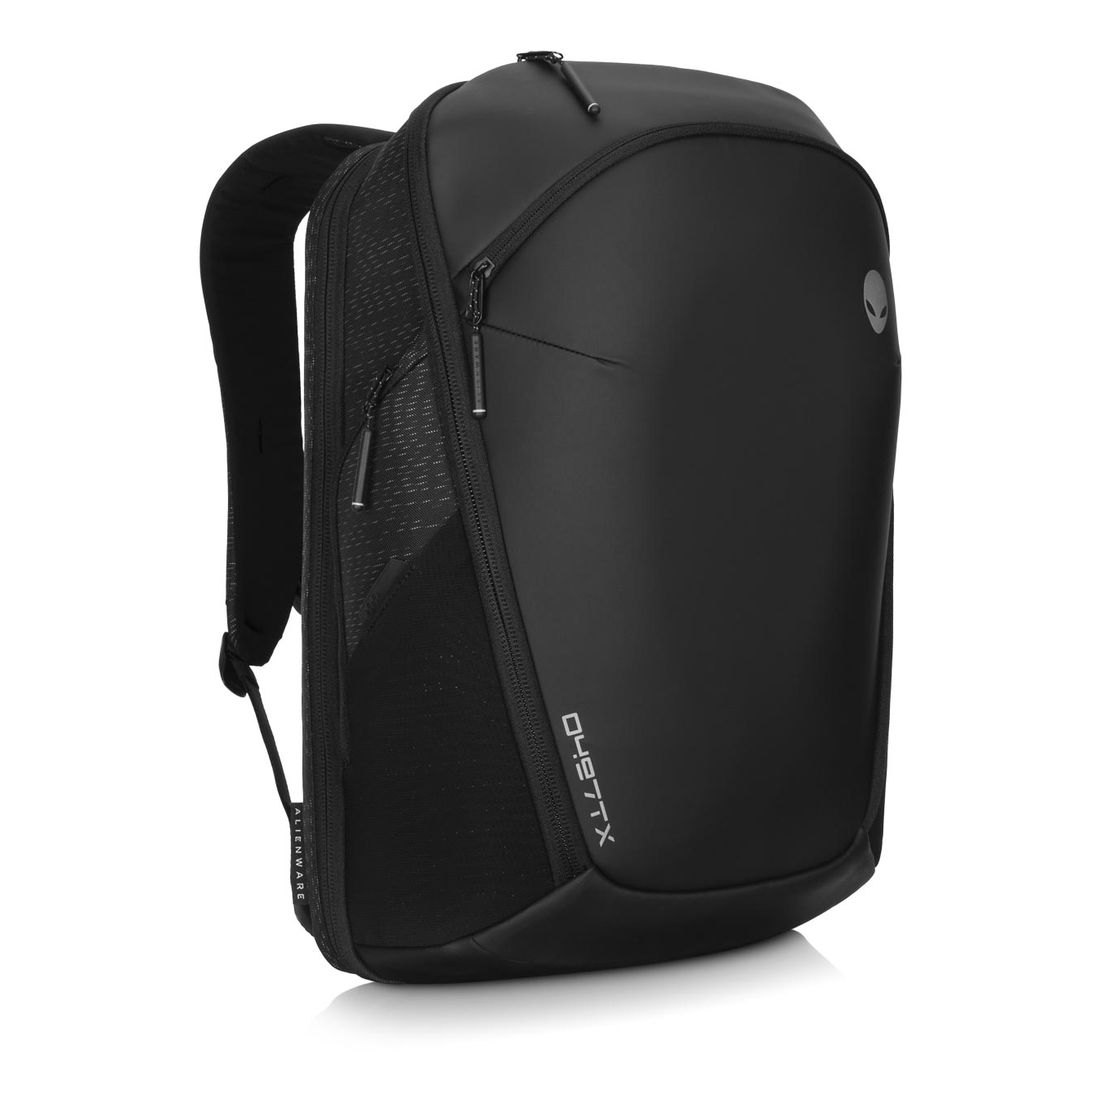 Alienware AW723P 17-inch Horizon Travel Backpack